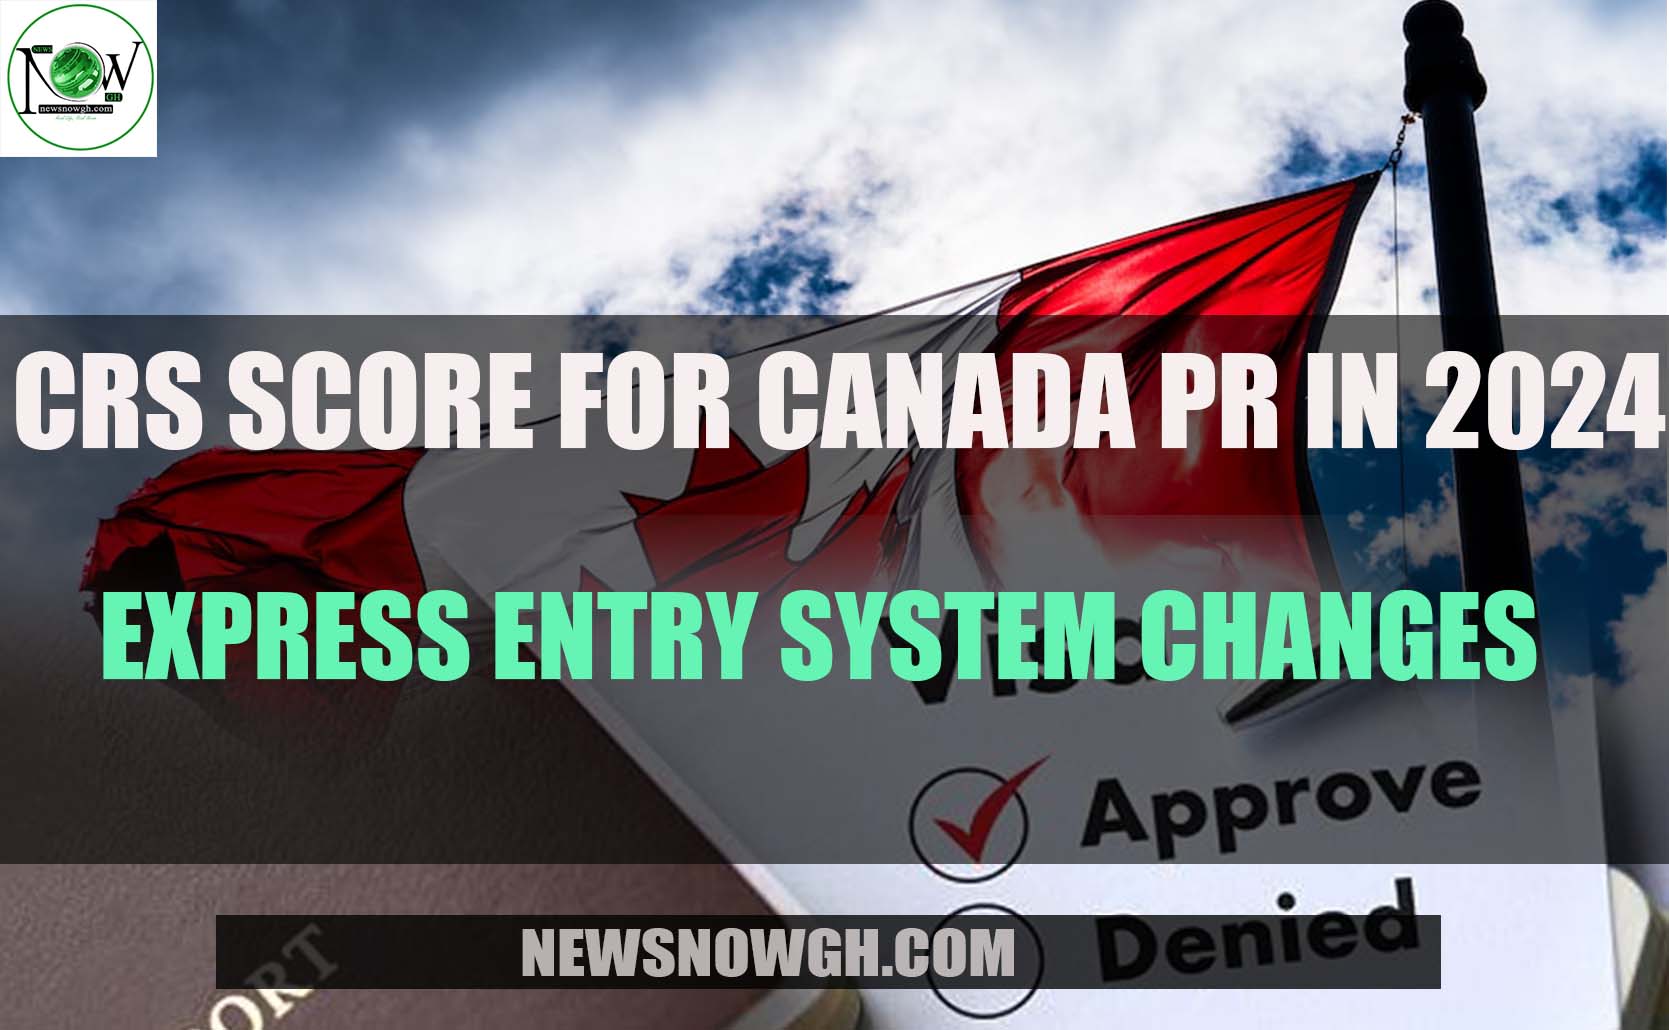 Express Entry System Changes CRS Score for Canada PR 2024